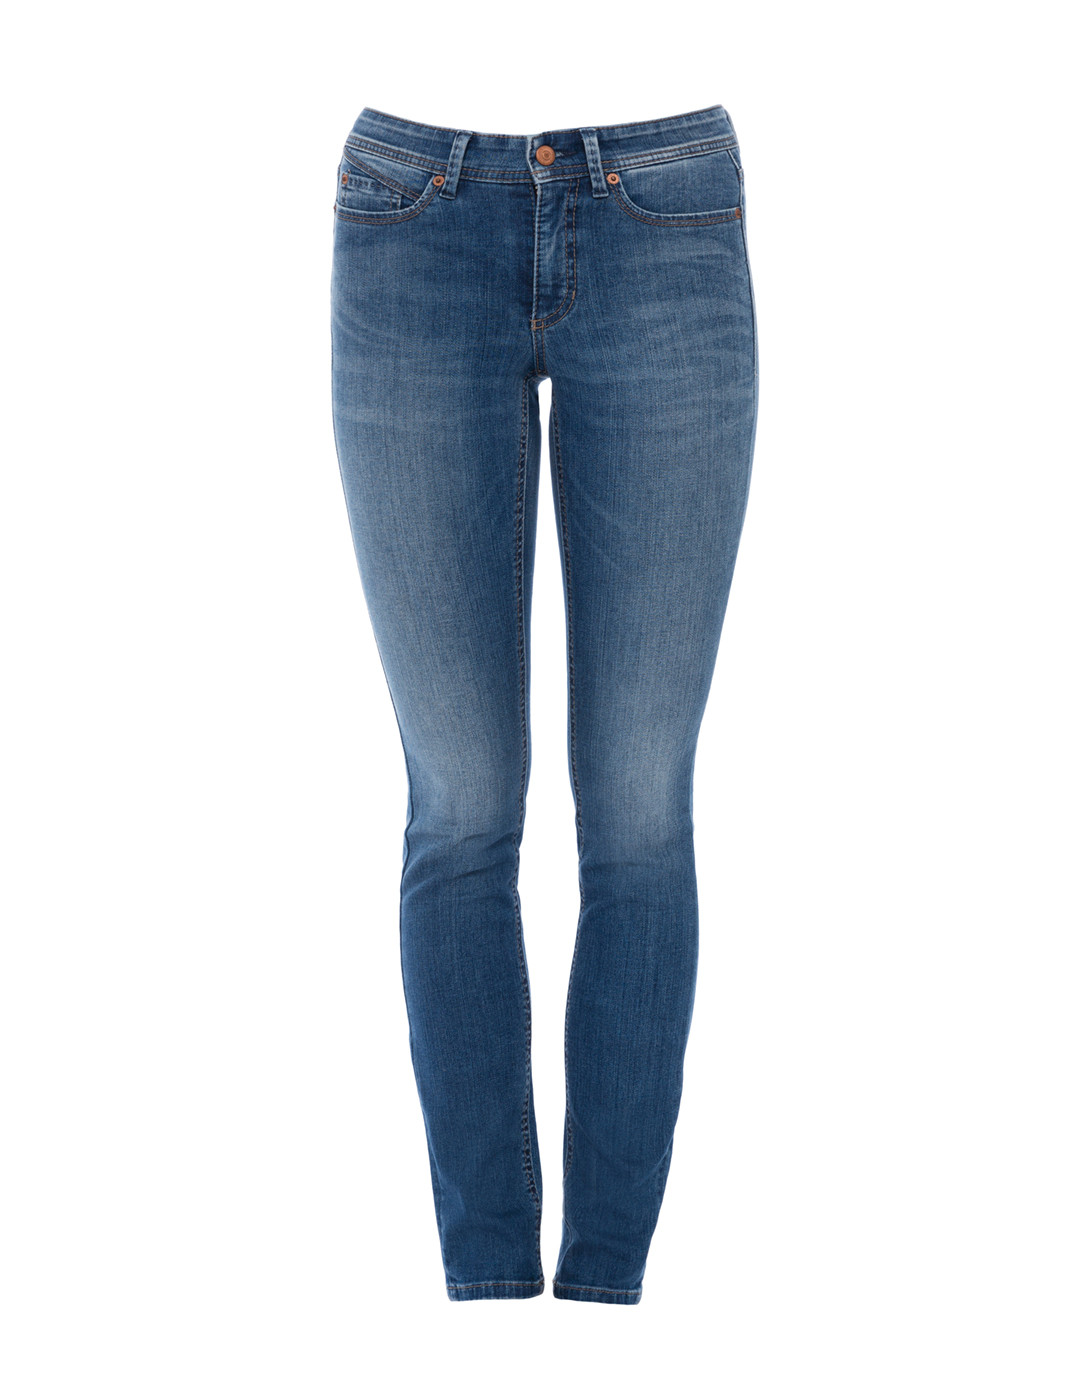 cambio jeans online